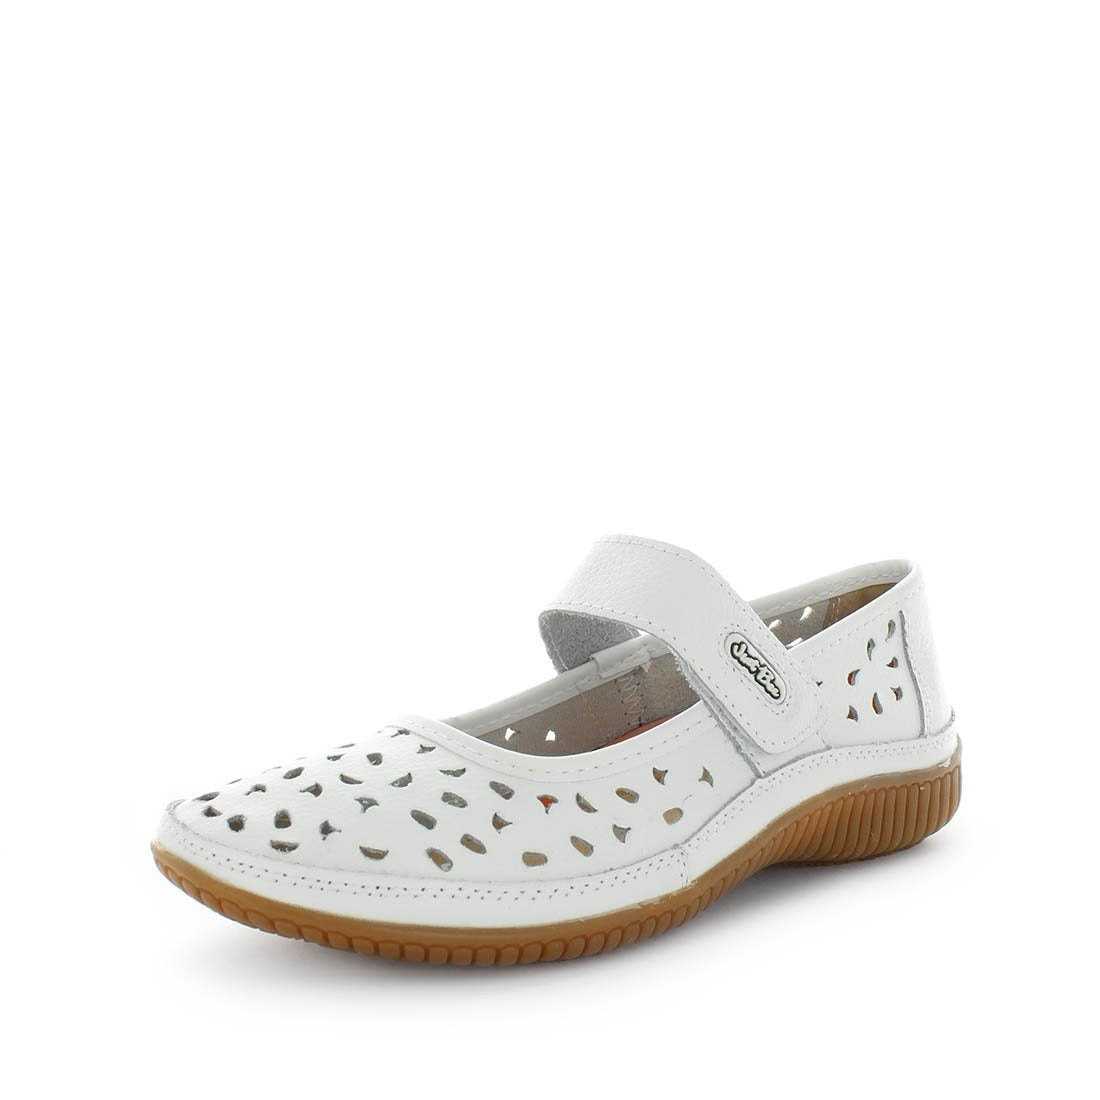 CALE BASIC - Just Bee Comfort  just bee shoes, comfort shoe, comfortable womens shoes, womens shoes, ladies shoes, casual womens slip on, elastic pull tab shoes,, flexible womens casual shoes, womens casual, womens shoes, leather shoes, leather ladies shoes, quality leather shoes, trans-seasonal shoes, just bee, just bee leather (4496867262543)